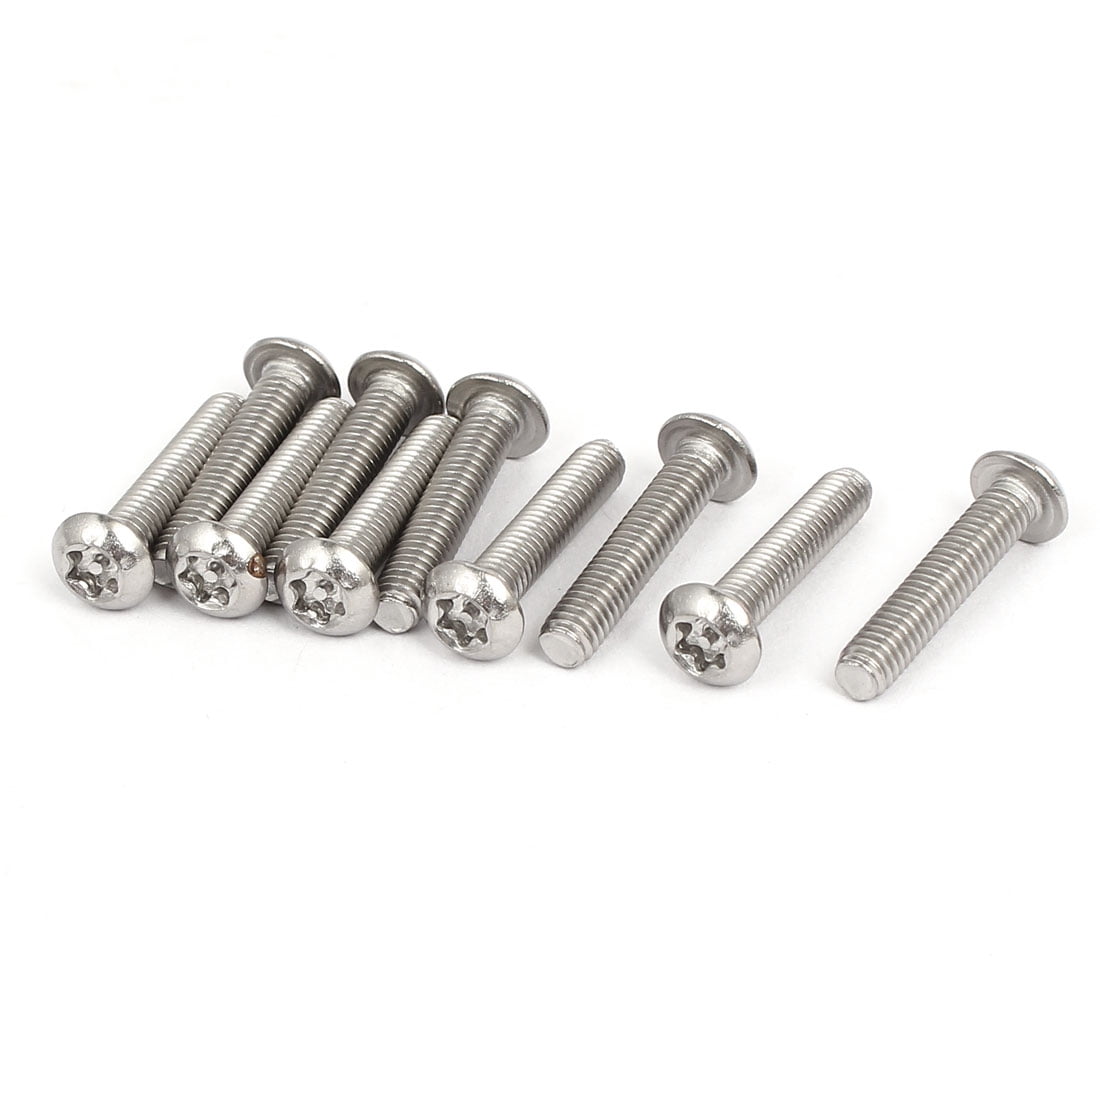 M2-M4 304 Stainless Torx Button Pan Round Head Tamper Proof Security Screw Bolt 